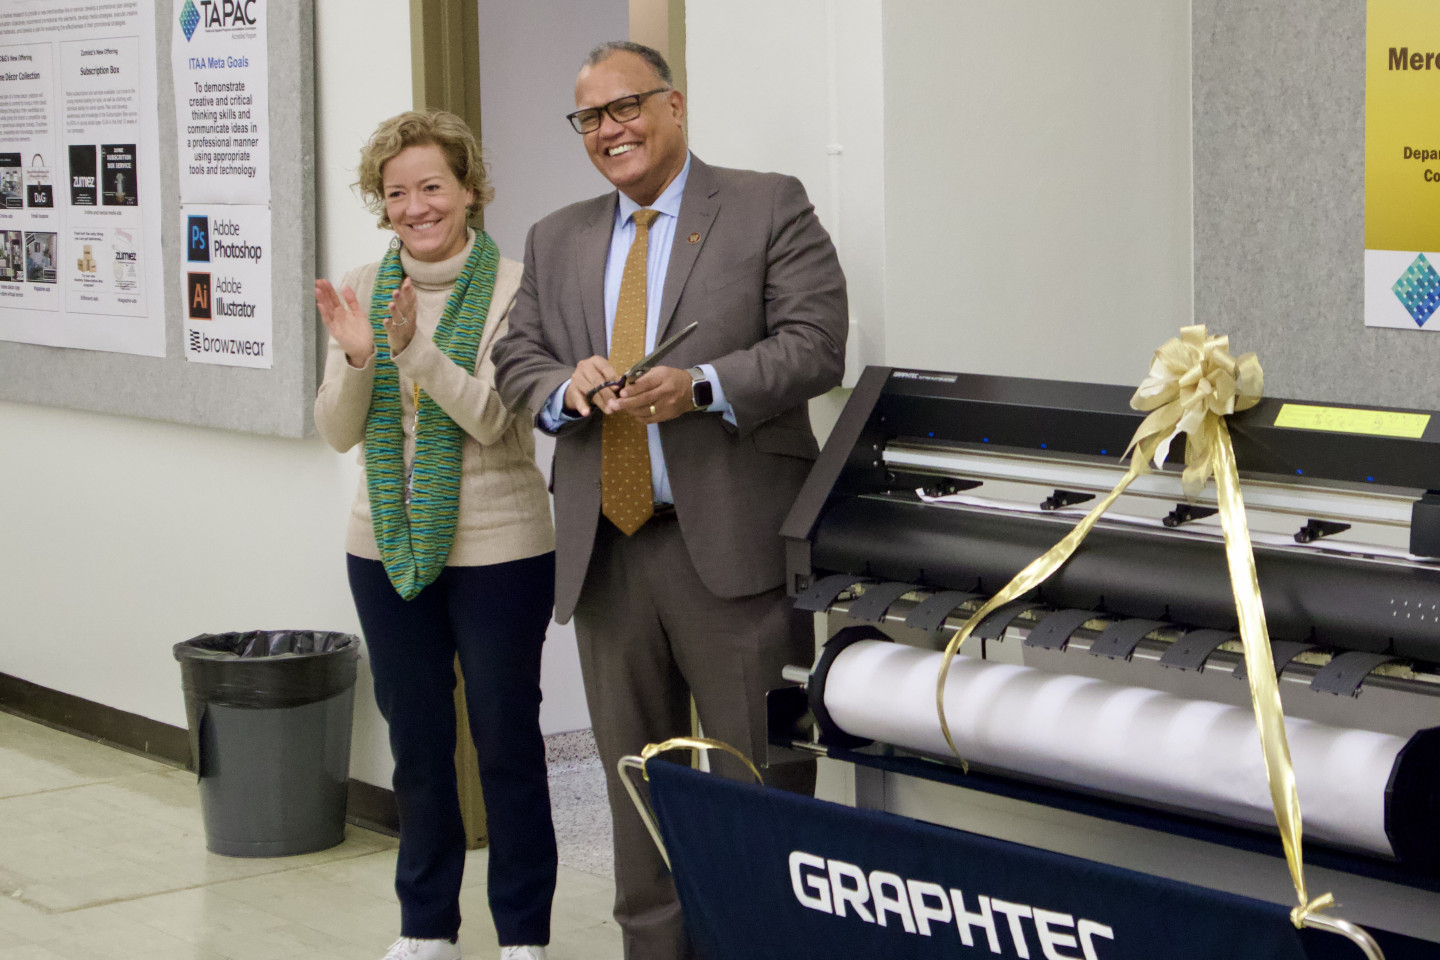 Dr. Laura Dinehart and President Edward Montgomery cut the ribbon for the new pattern plotter printer.